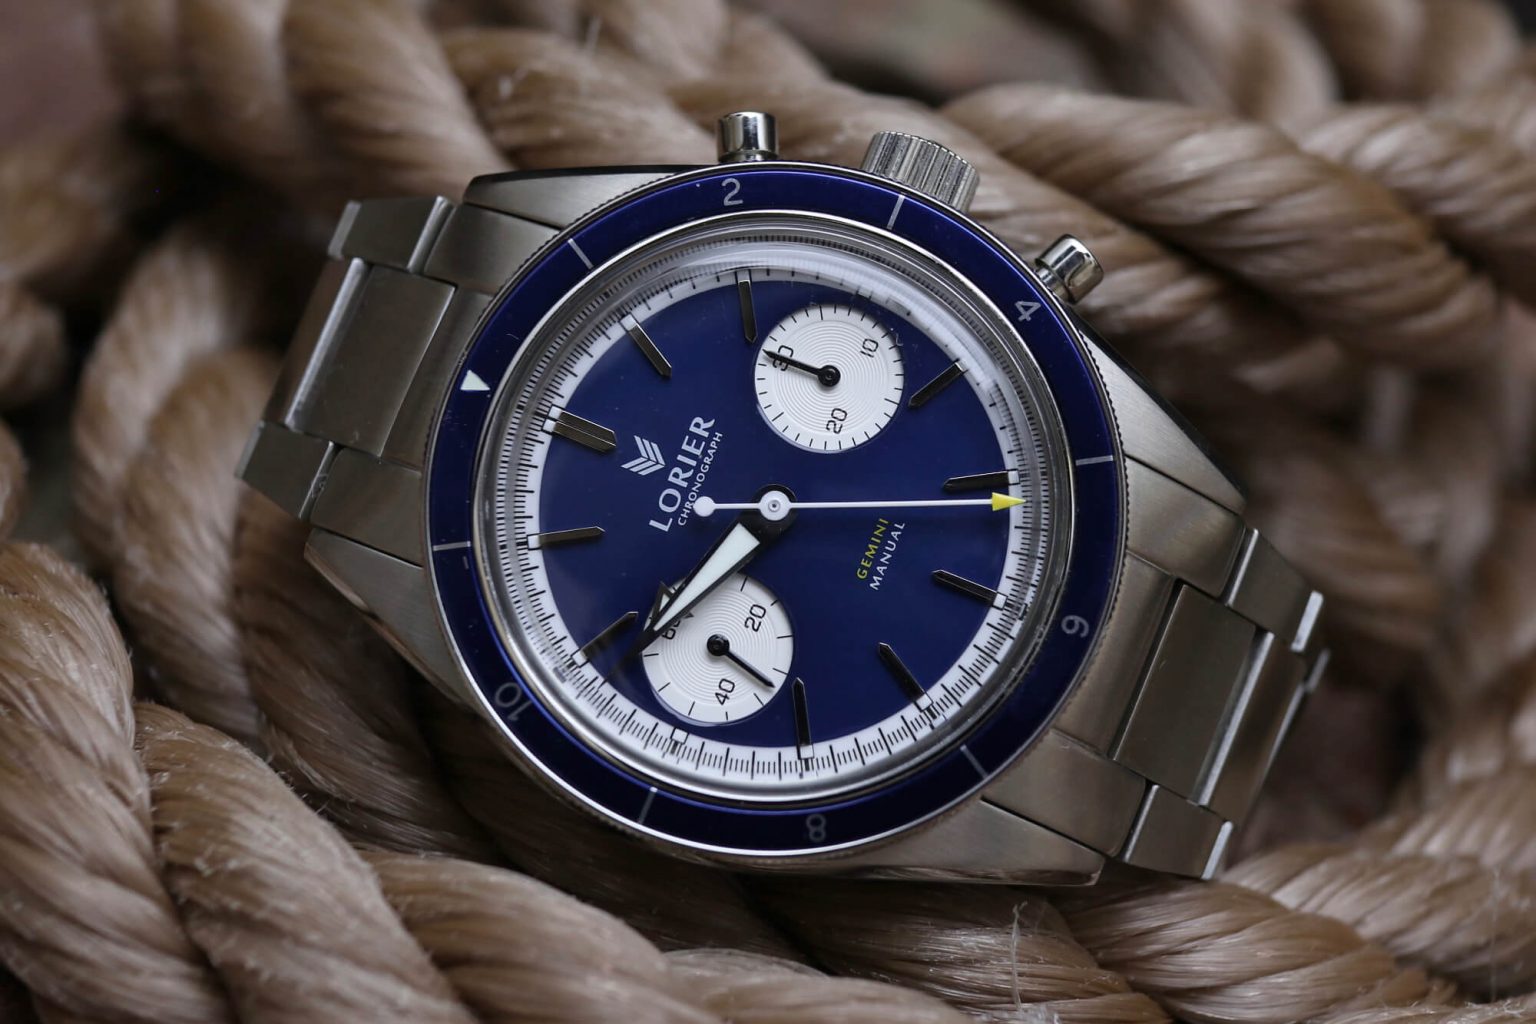 Lorier Gemini Chronograph 39mm Review - Watch Clicker